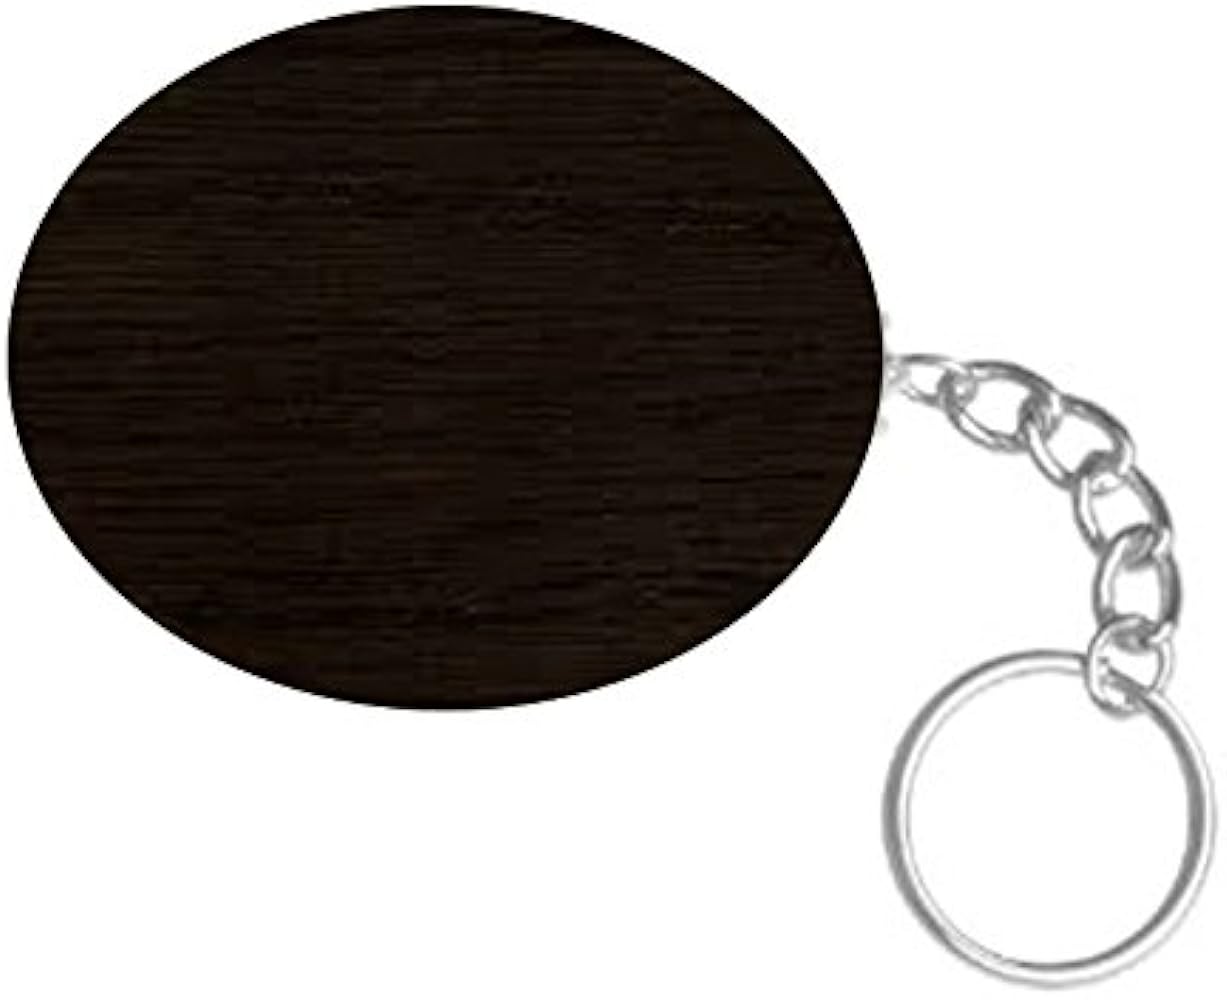 ShopTwiz One Direction Printed Wooden (Oval Shape) Keyring